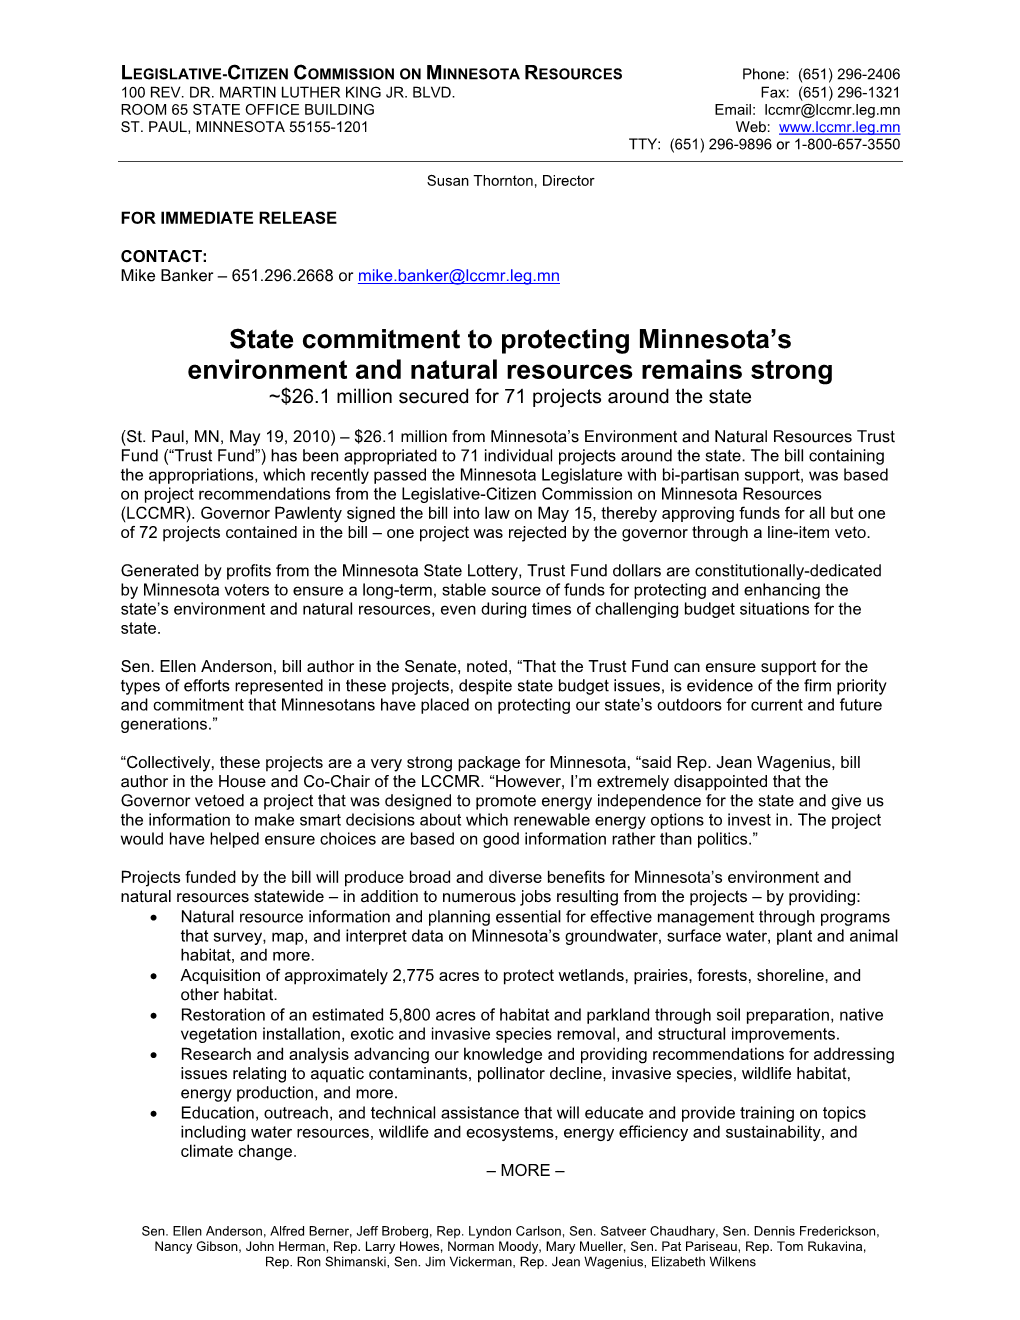 State Commitment to Protecting Minnesota's Environment and Natural Resources Remains Strong